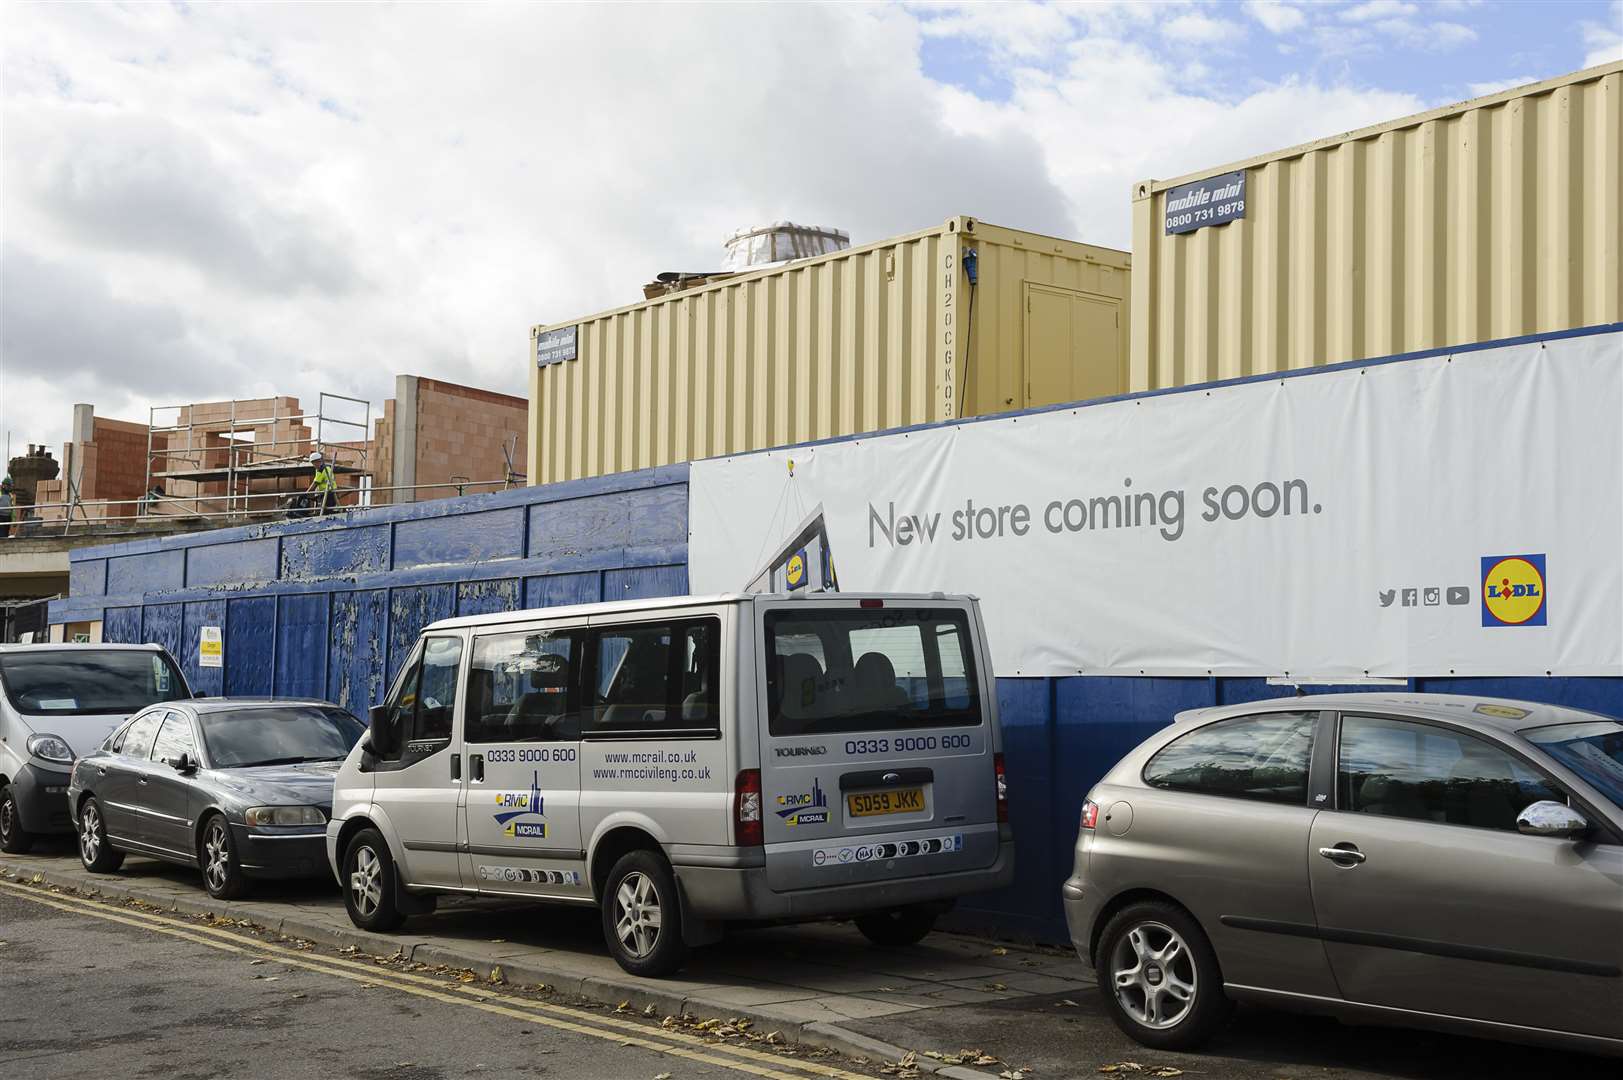 The site of the former Dartford police station on Instone Road, Dartford, soon to be a new Lidl siupermarket